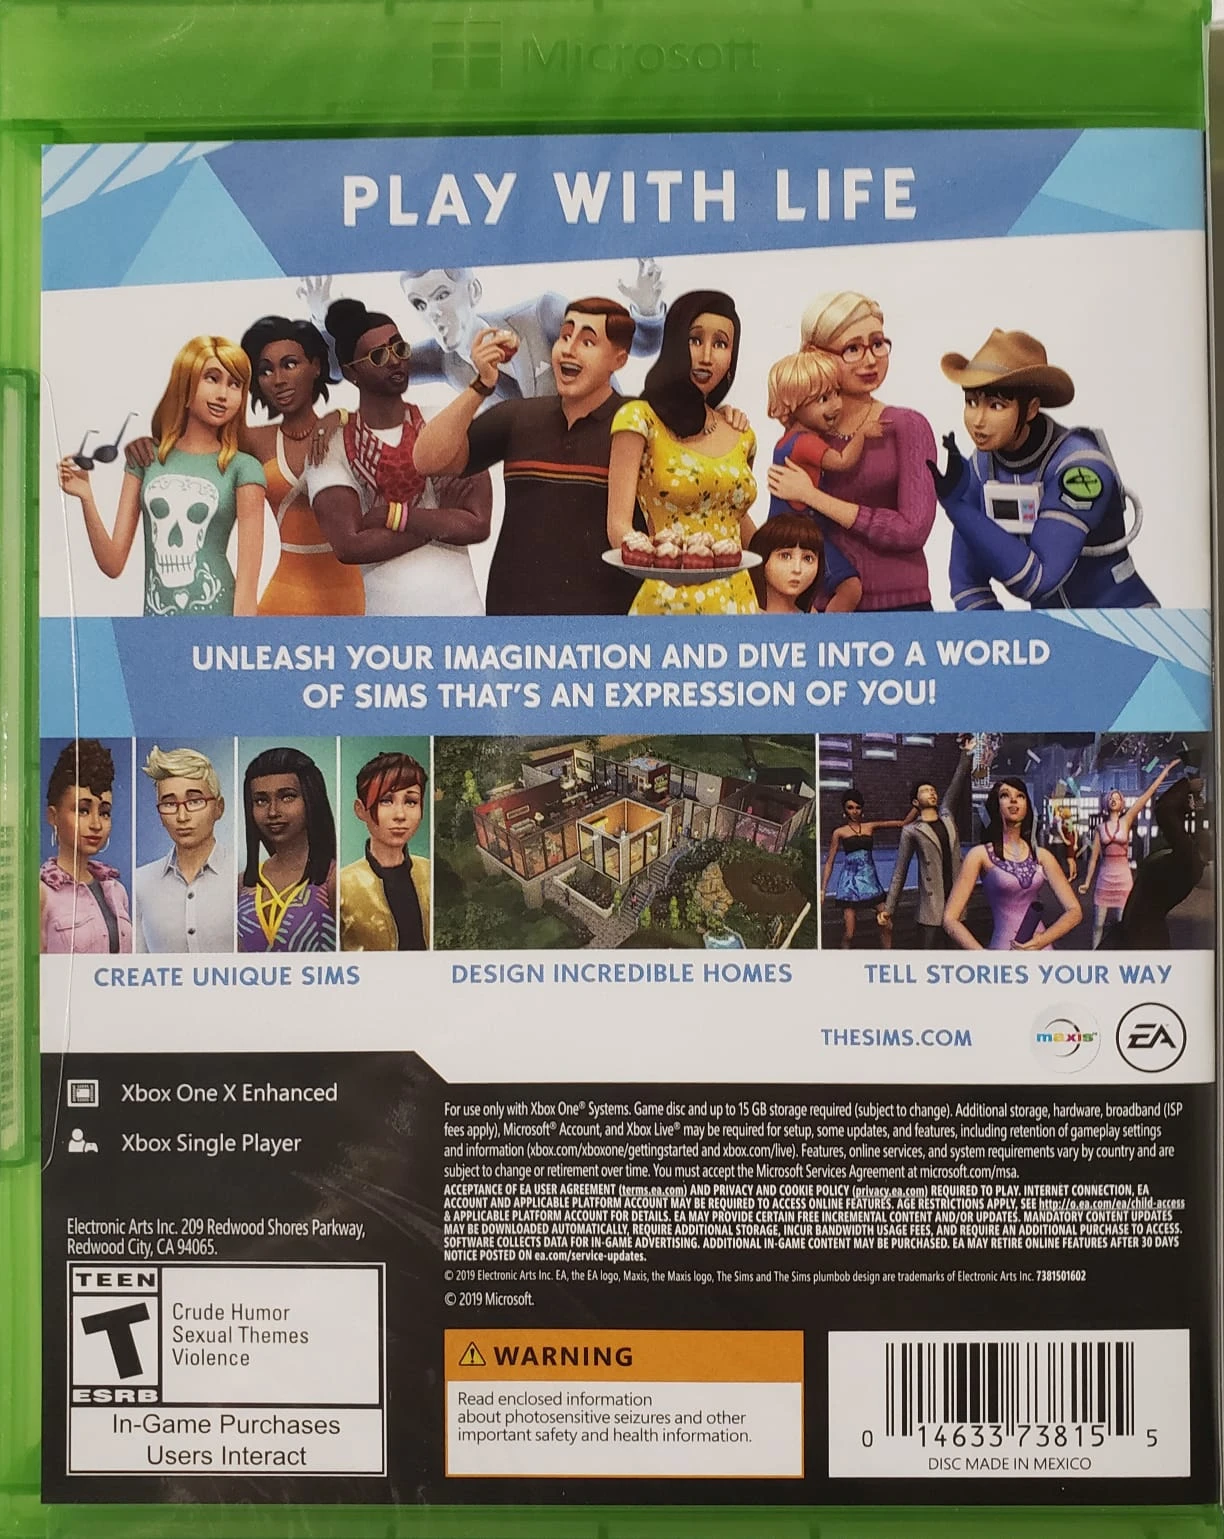 The Sims 4 (US)